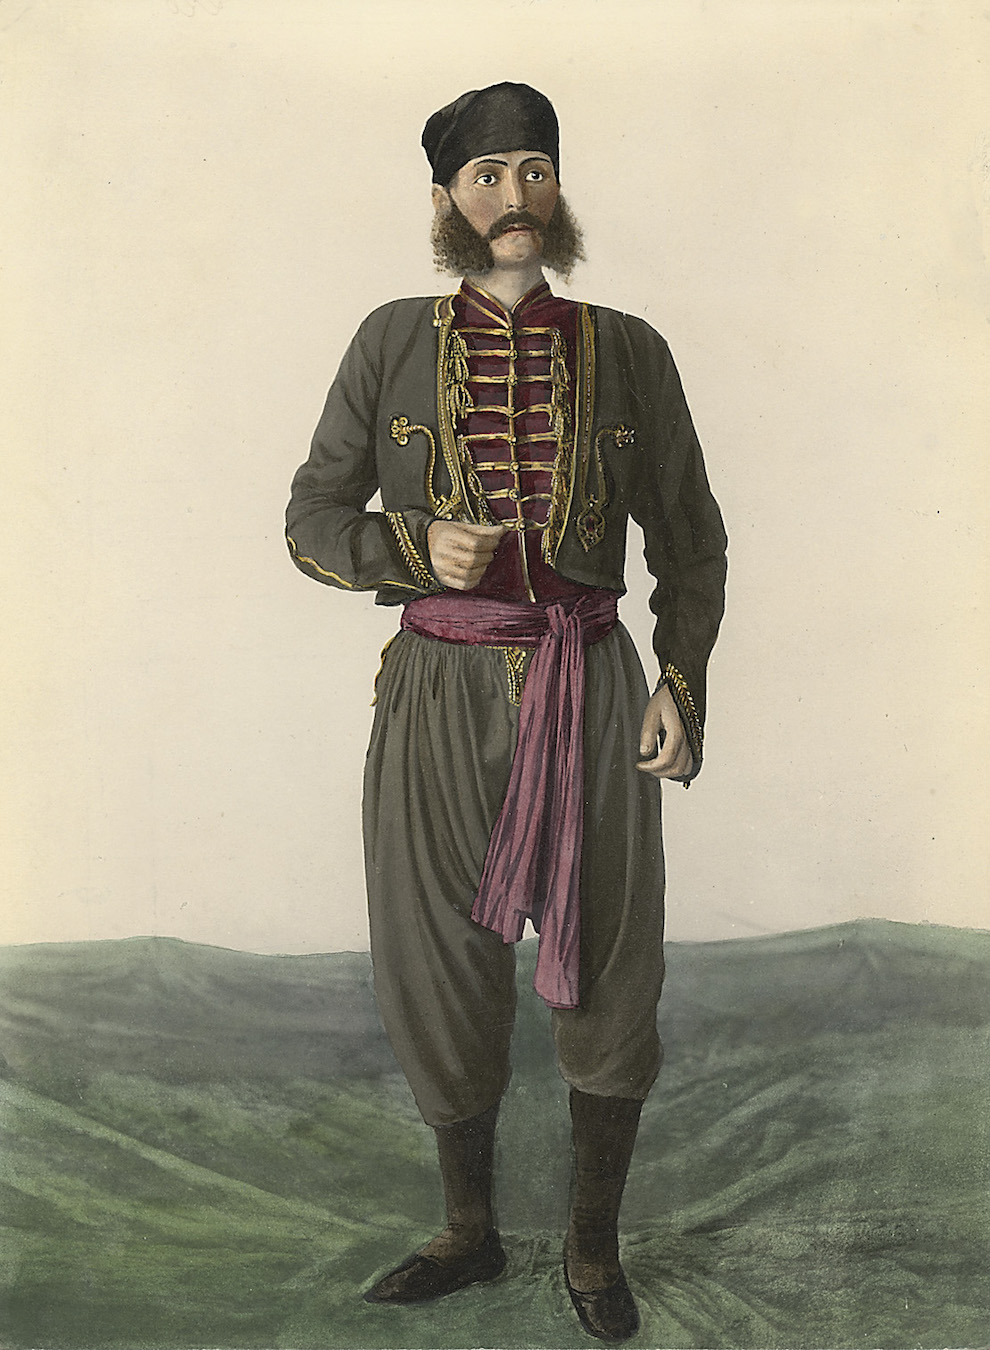 Montenegrin Man from the Bay of Kotor Region